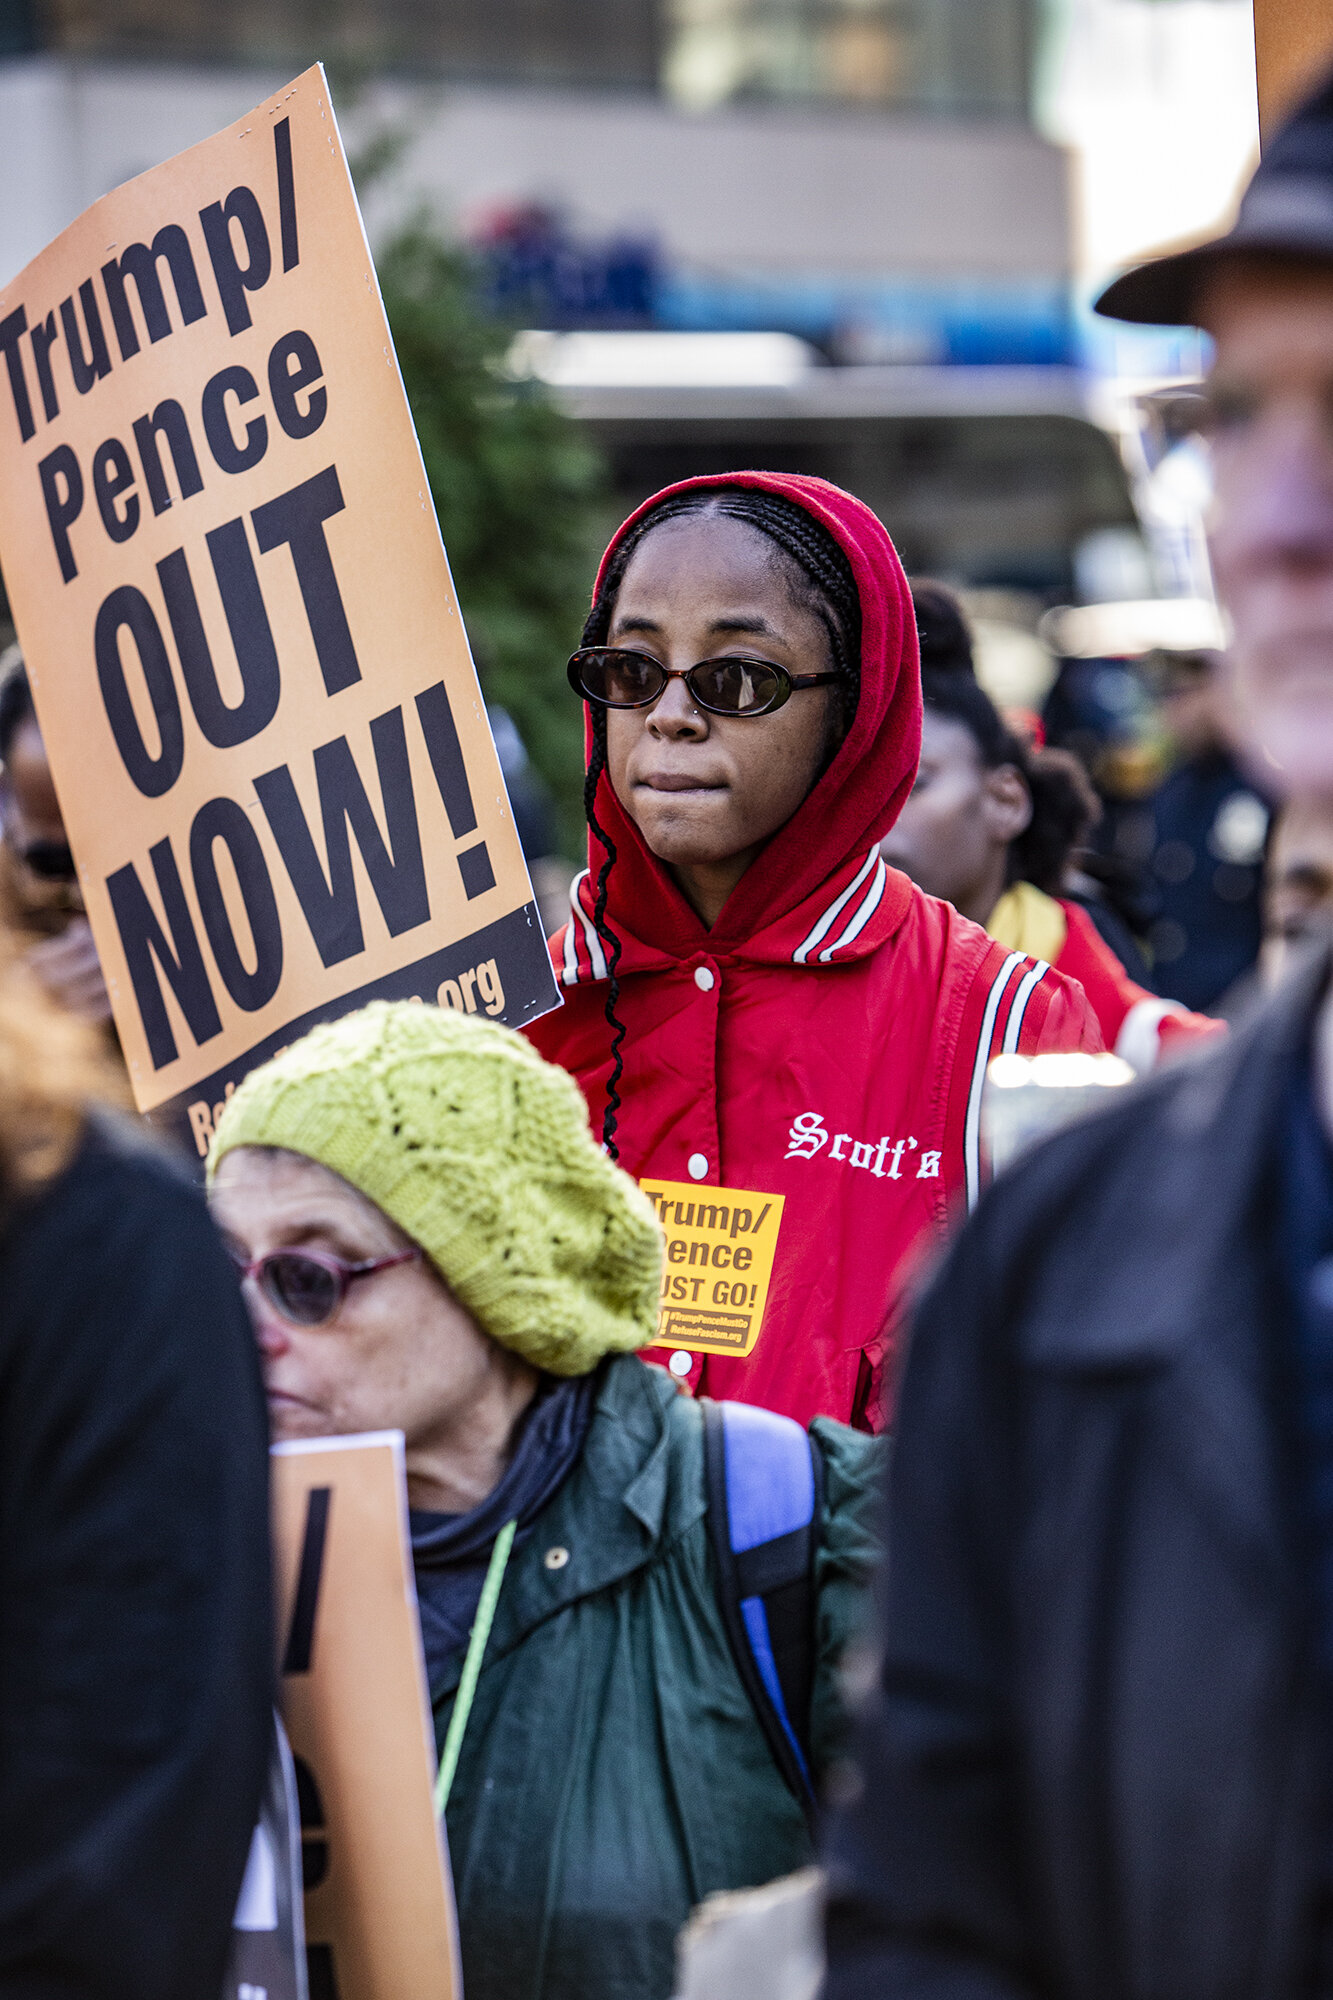 OUTNOW_Protest_2019_NYC-0683.jpg